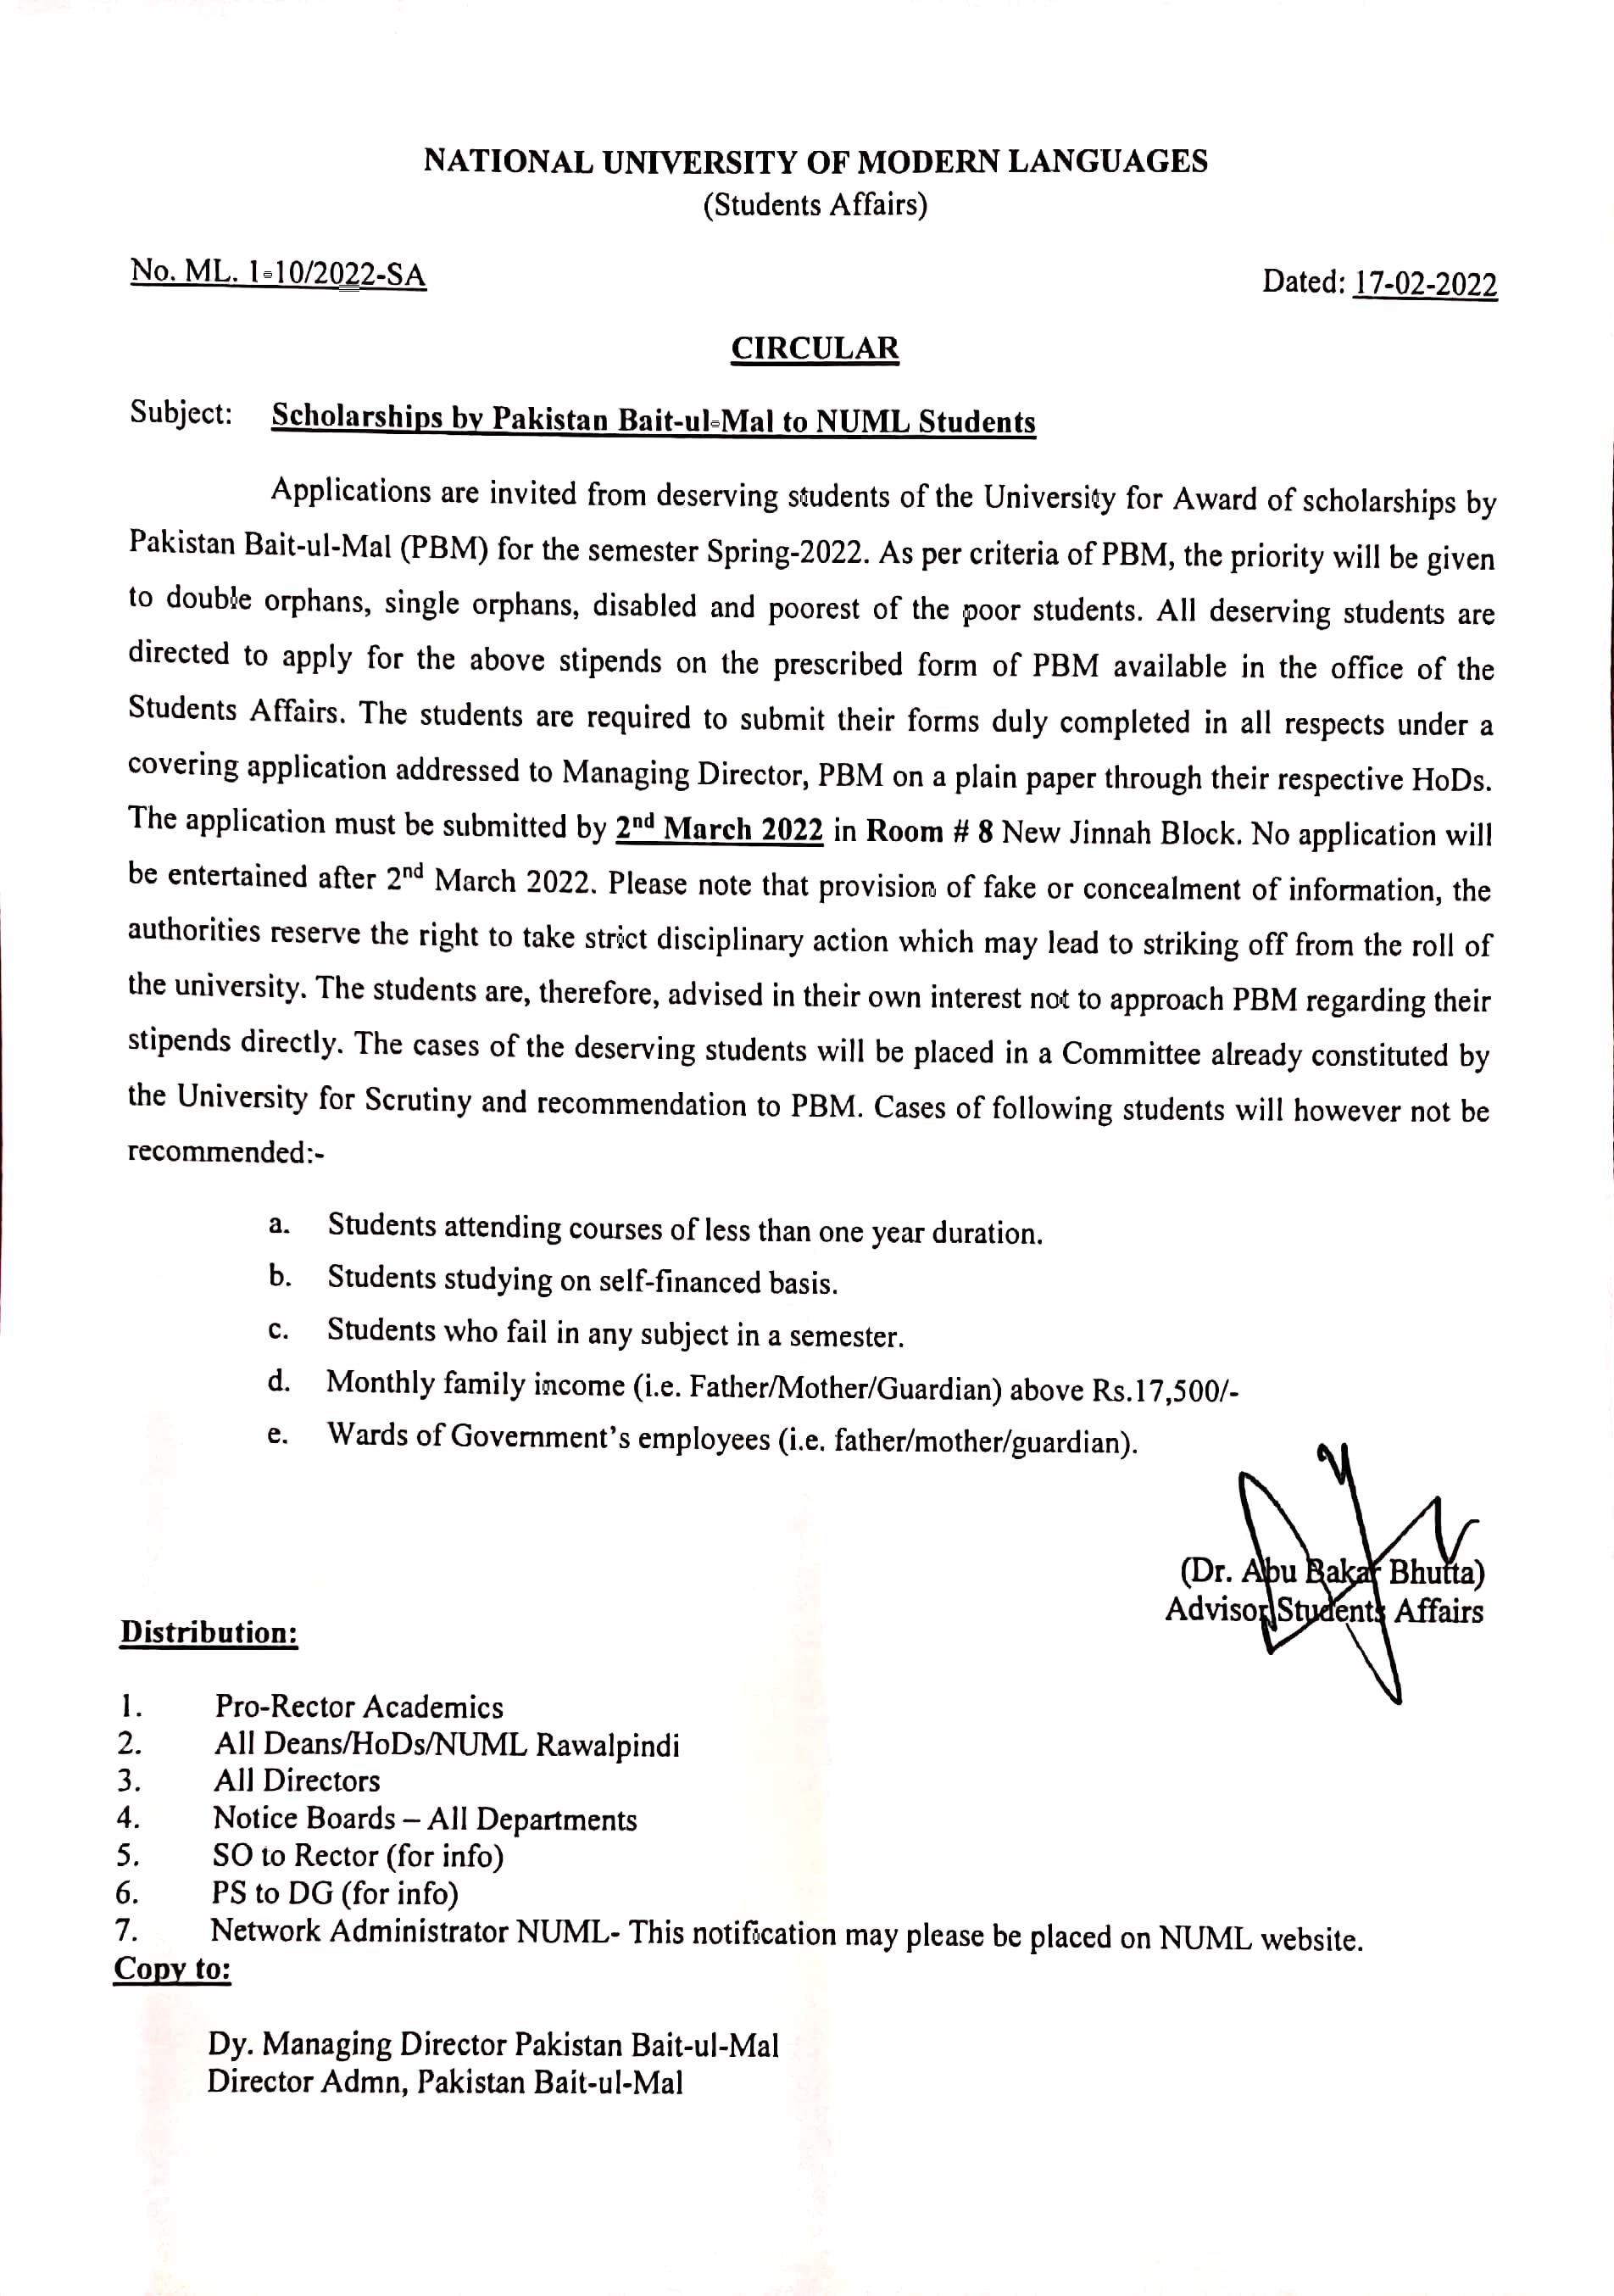 Scholarships by Pakistan Bait-ul-Mal to NUML Students (Fresh Cases)